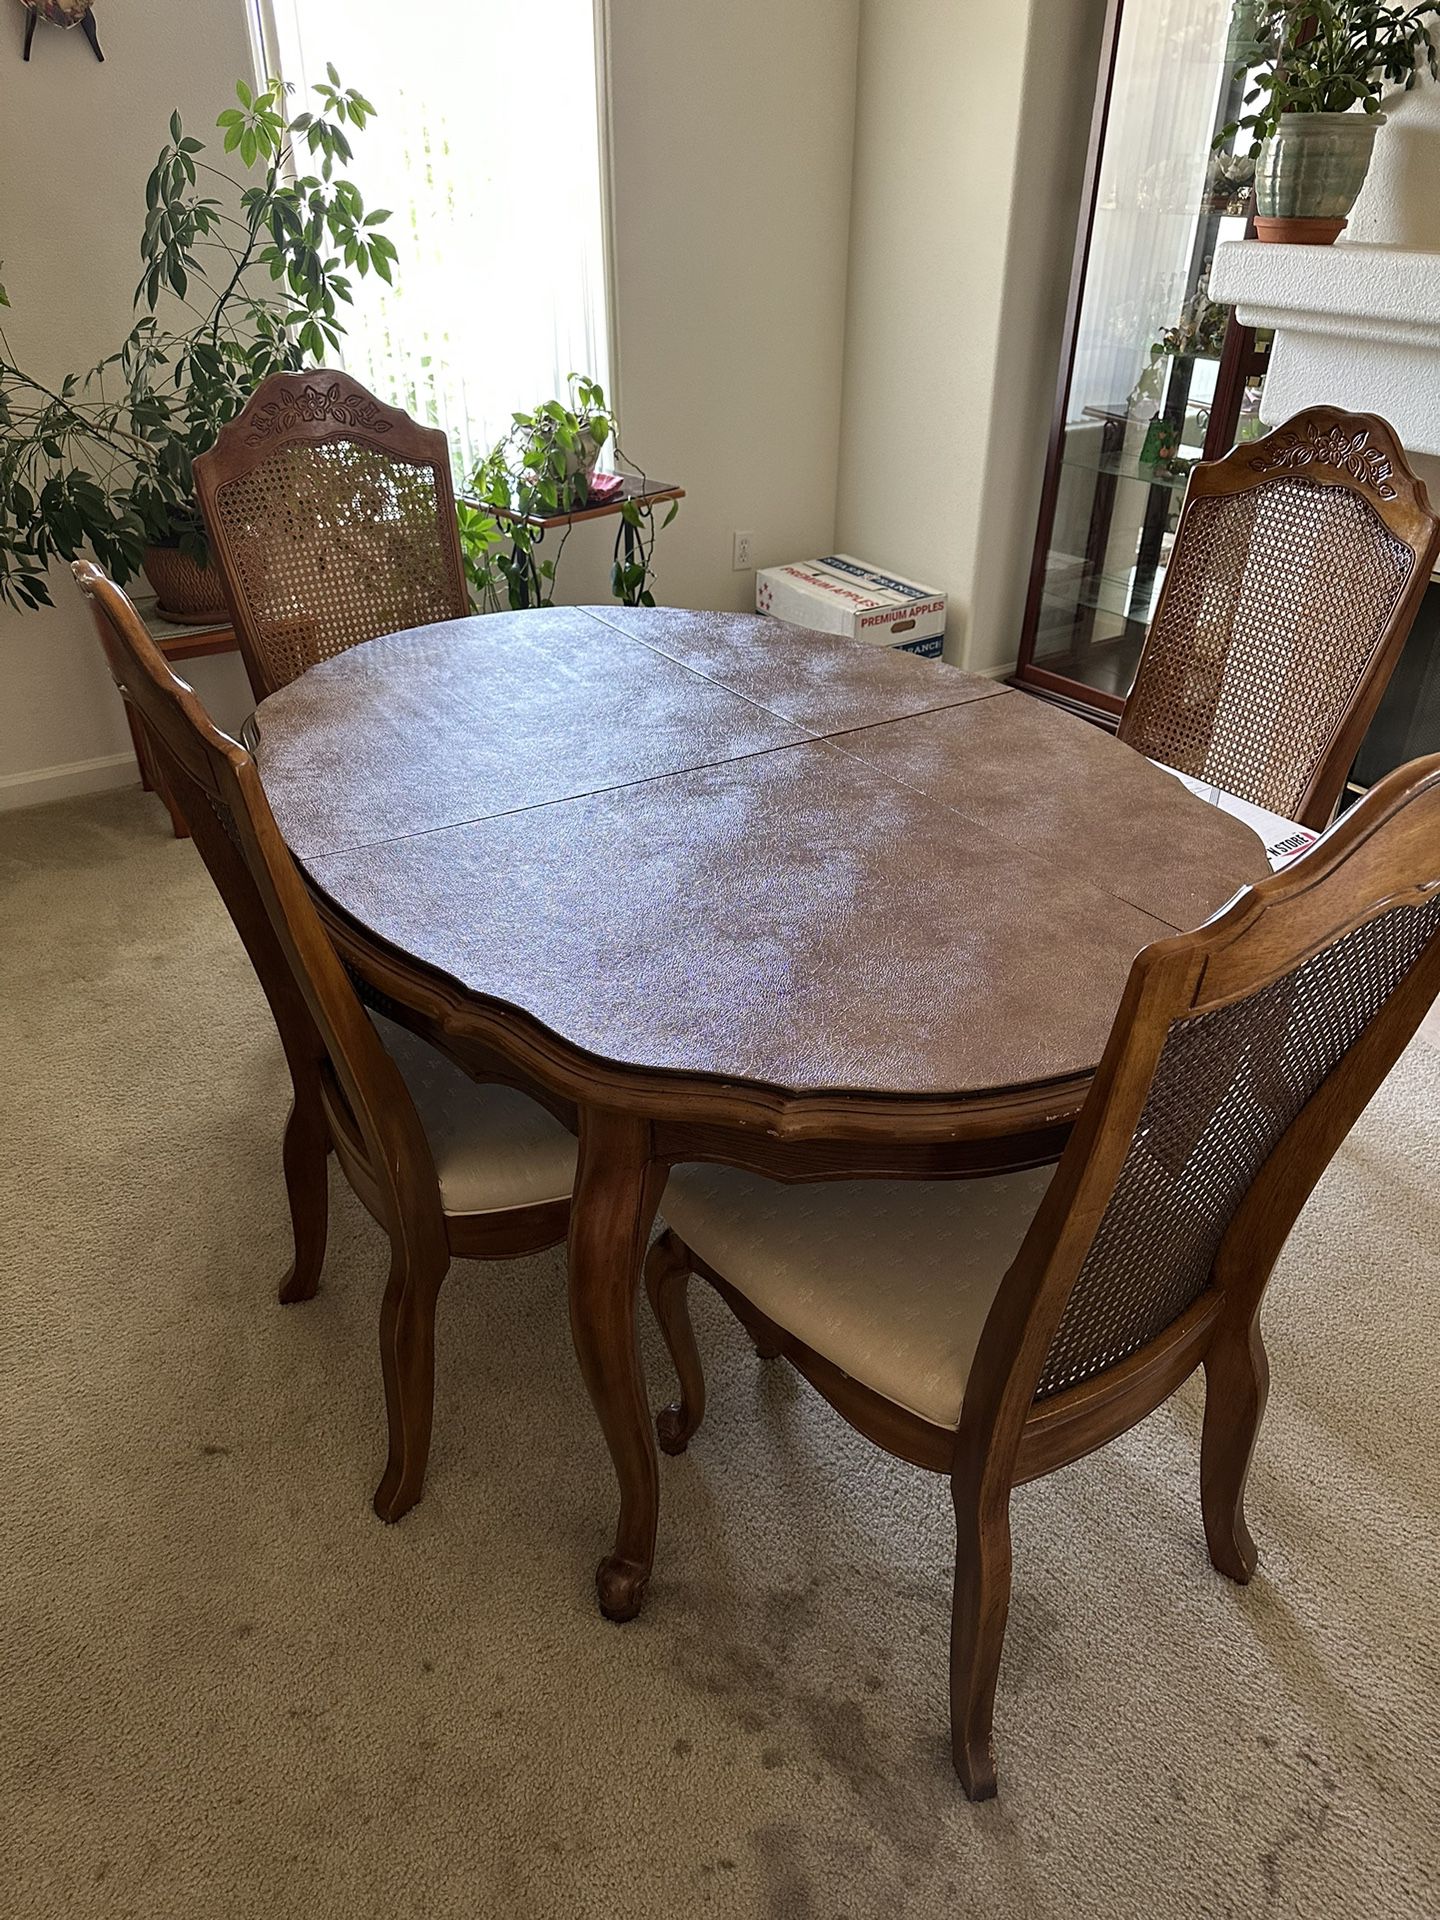 Dining Room Table Seats 6